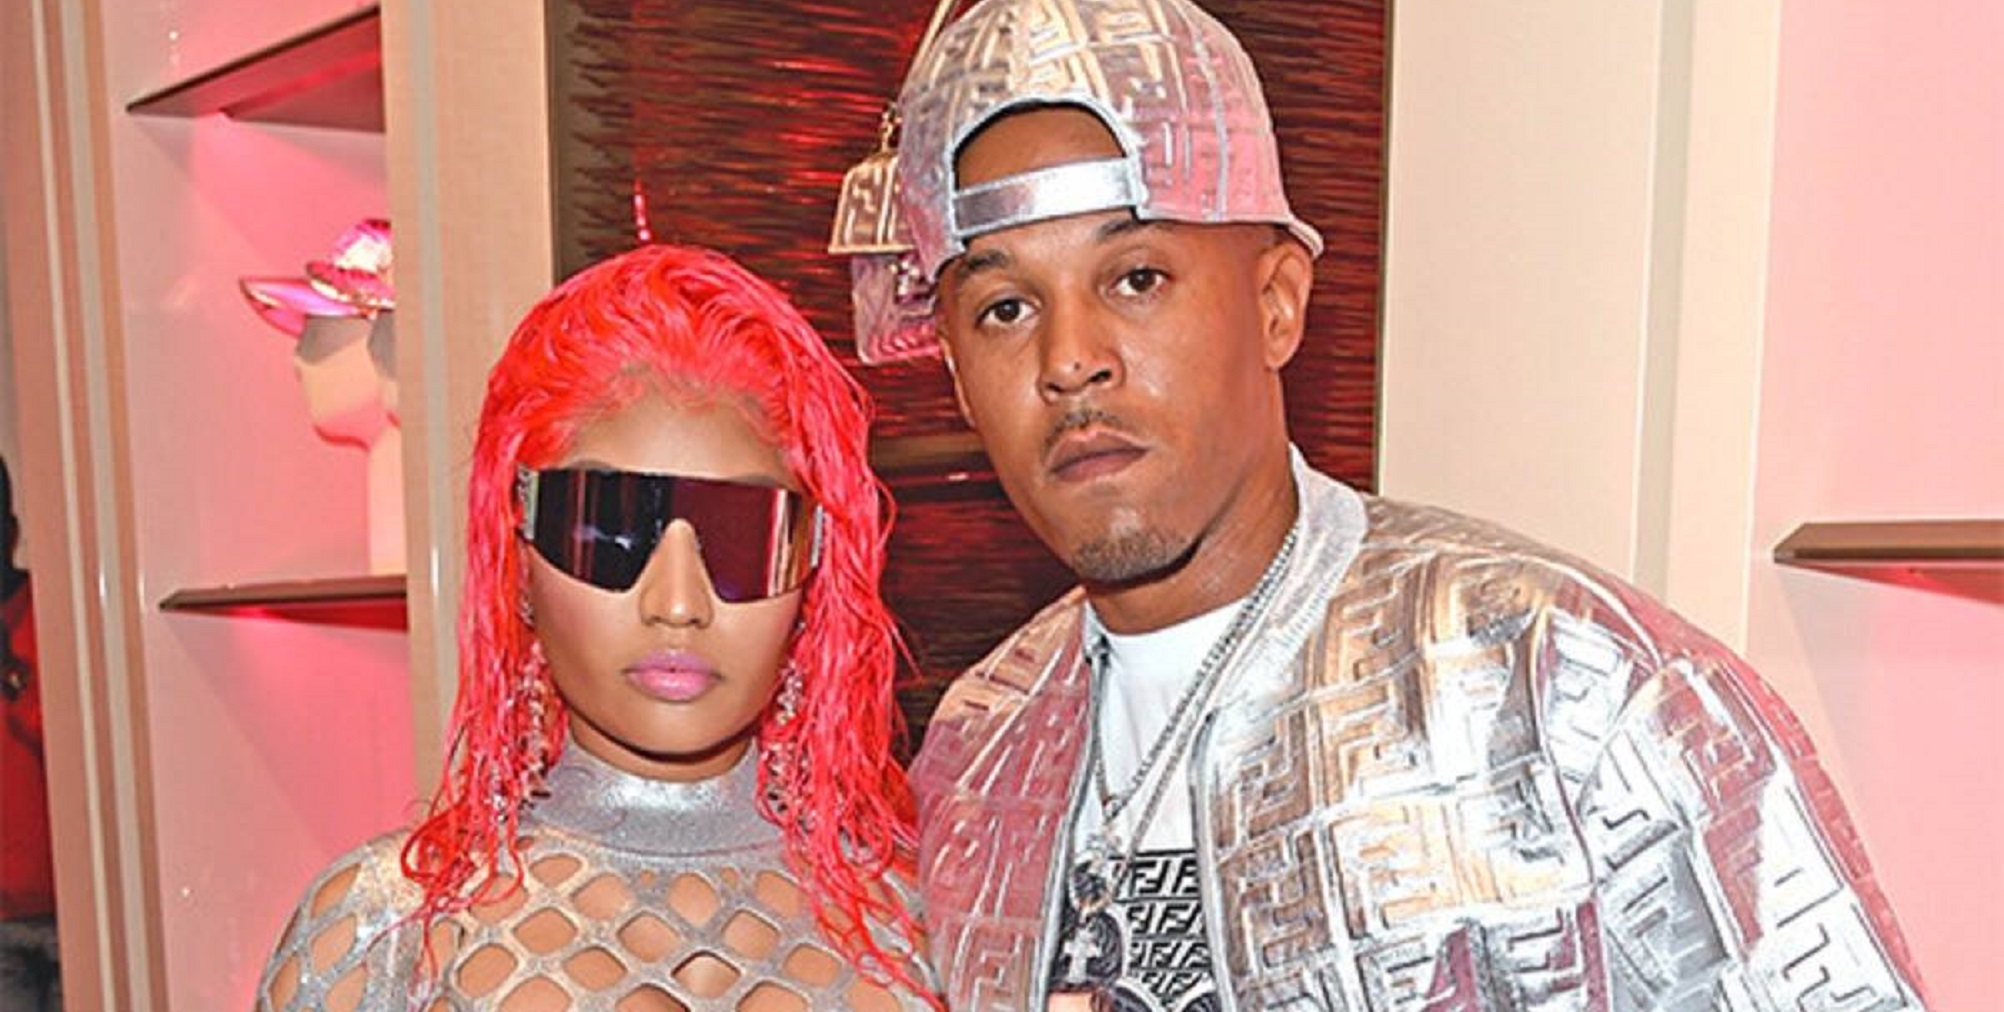 Nicki Minaj’s Hubby Kenneth Petty Arrested For Failing To Register As a Sex Offender